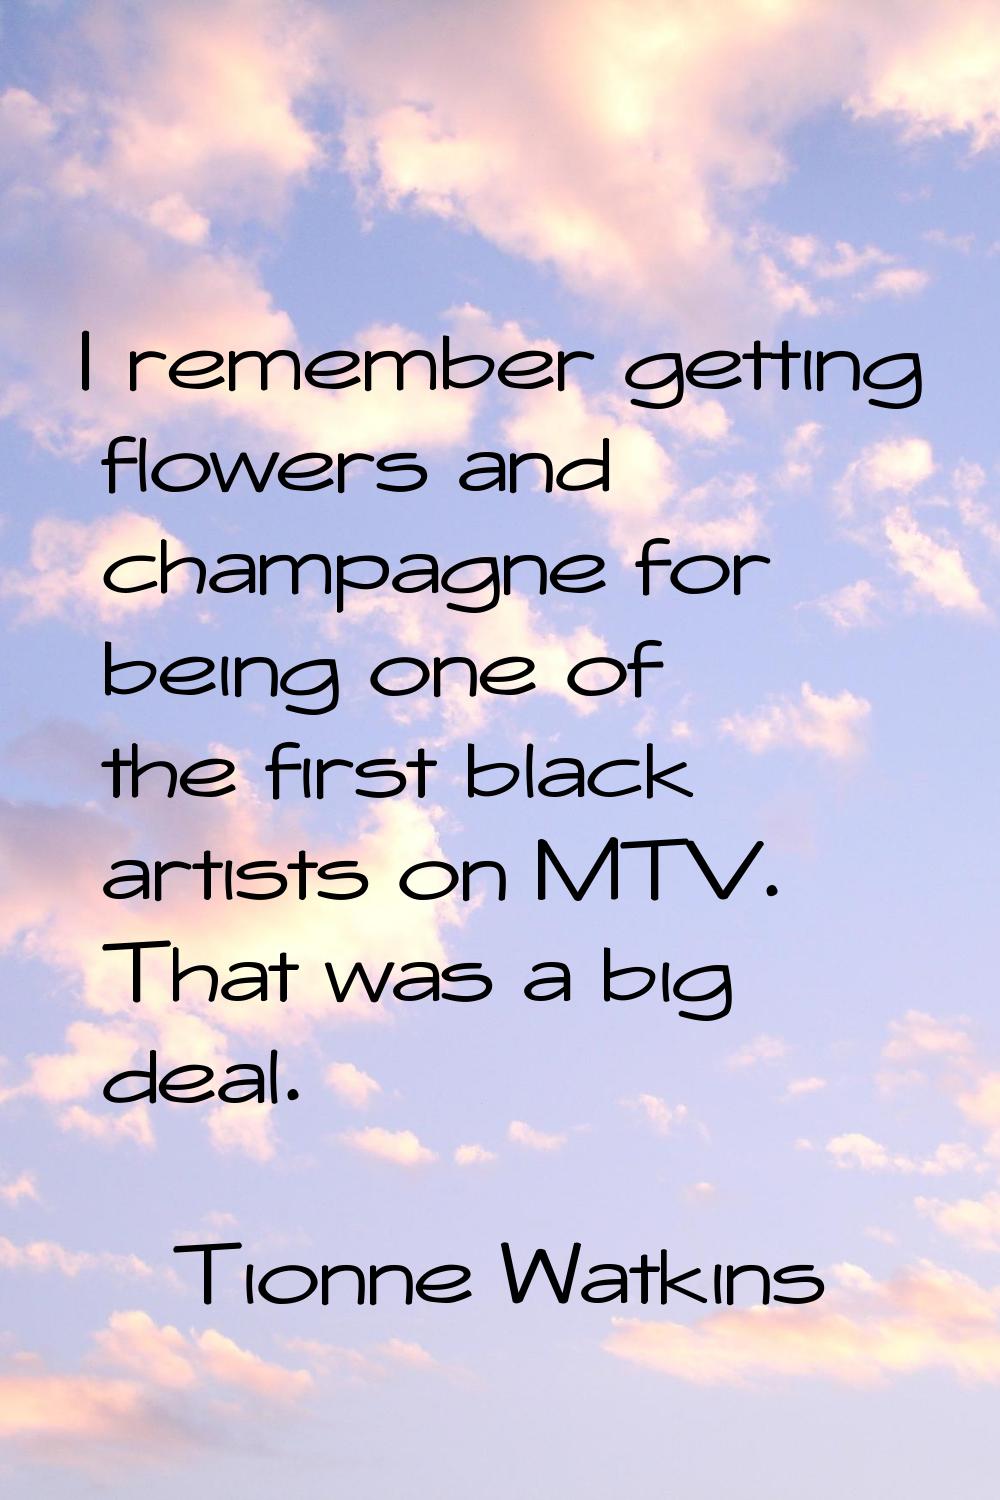 I remember getting flowers and champagne for being one of the first black artists on MTV. That was 